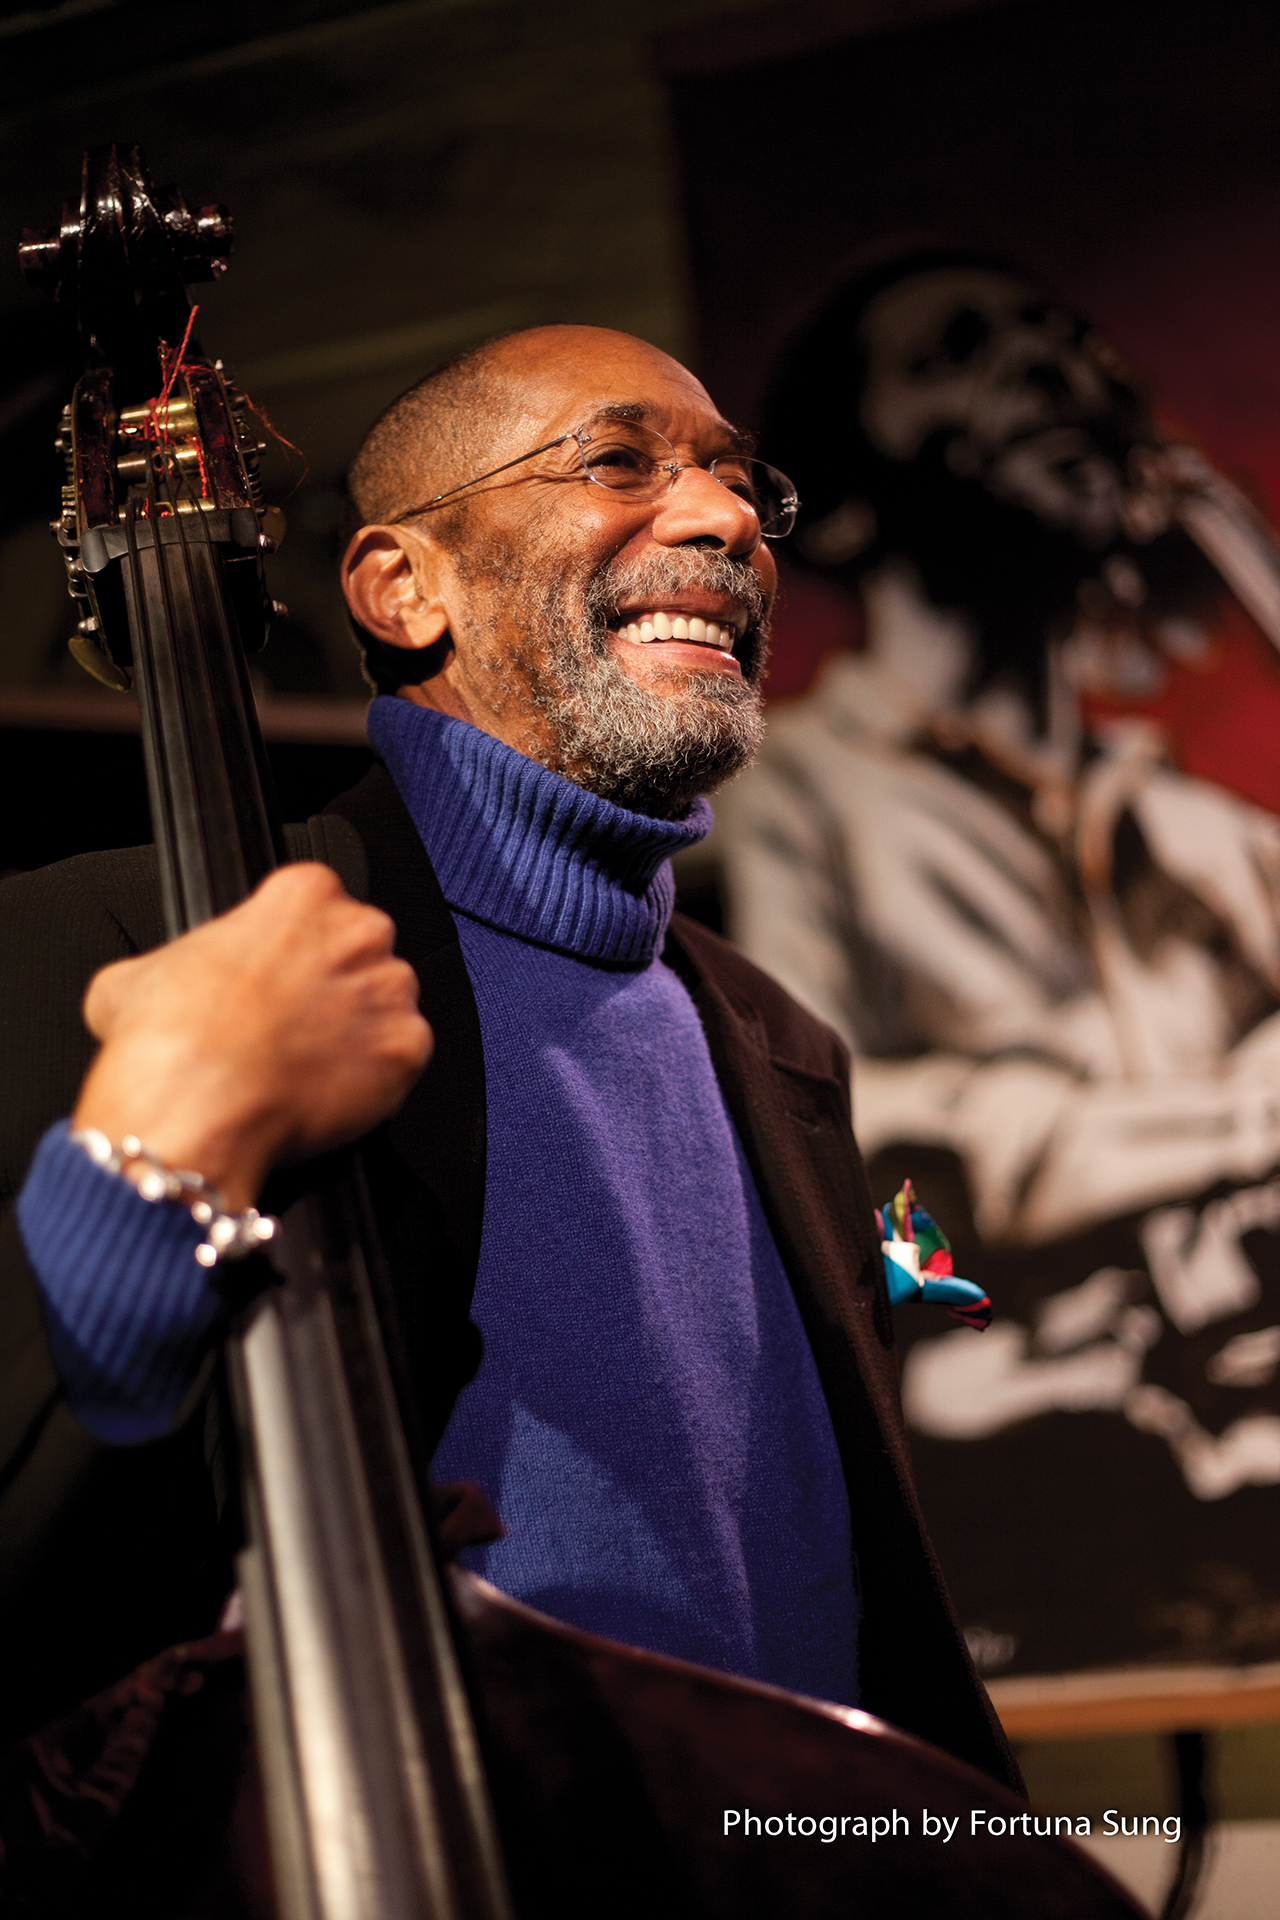 Delfeayo & Friends with Special Guest Ron Carter